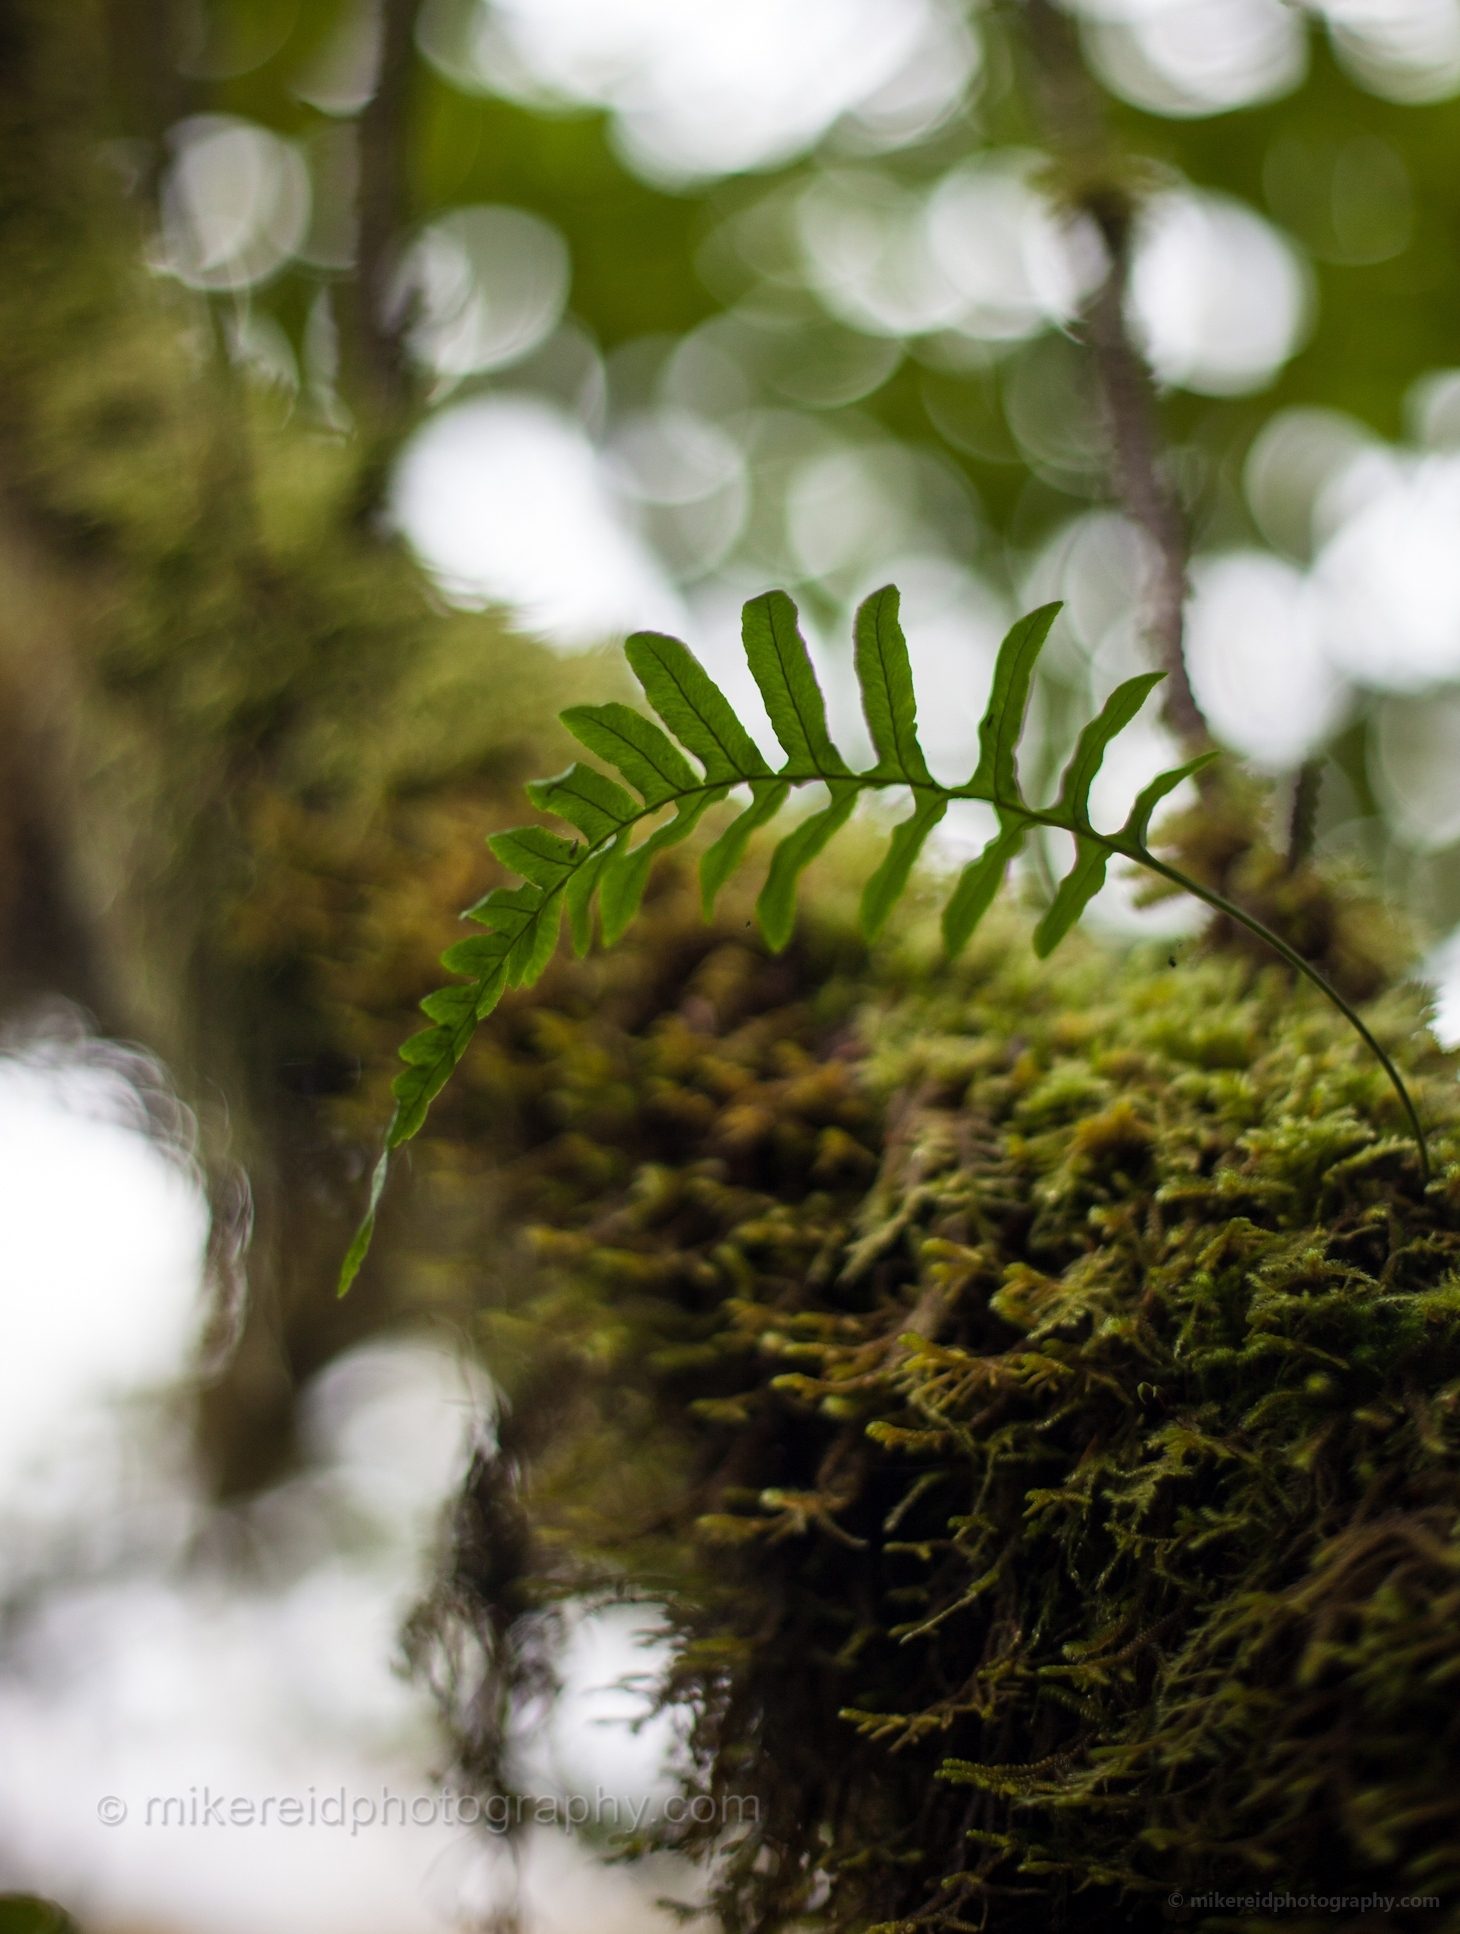 Fern and Moss